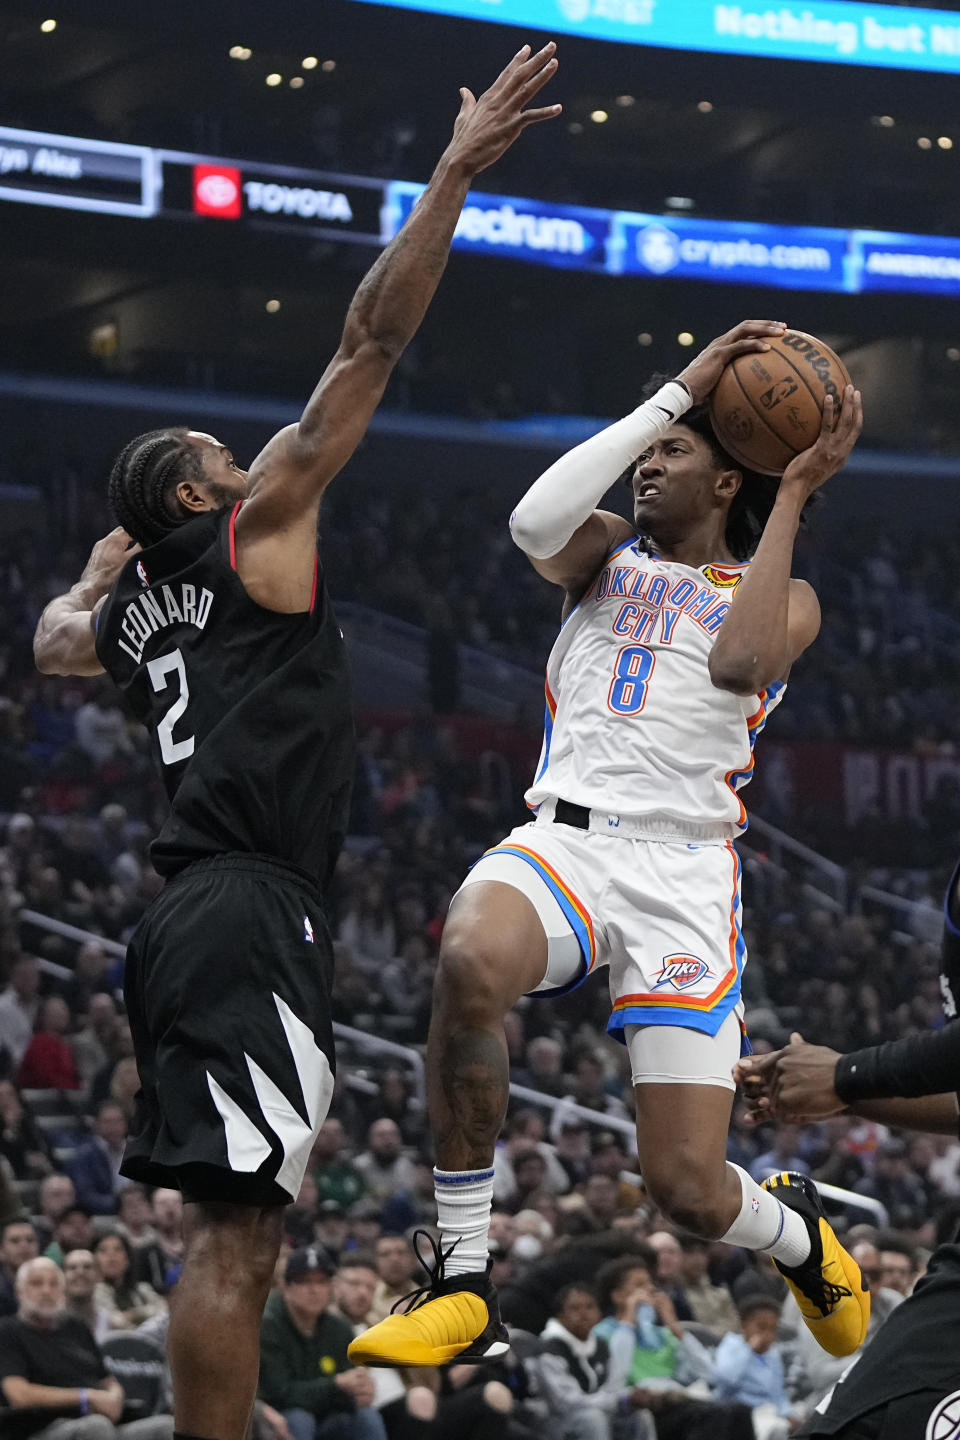 Oklahoma City Thunder forward Jalen Williams, right, shoots as LA Clippers forward Kawhi Leonard defends during the first half of an NBA basketball game Thursday, March 23, 2023, in Los Angeles. (AP Photo/Mark J. Terrill)